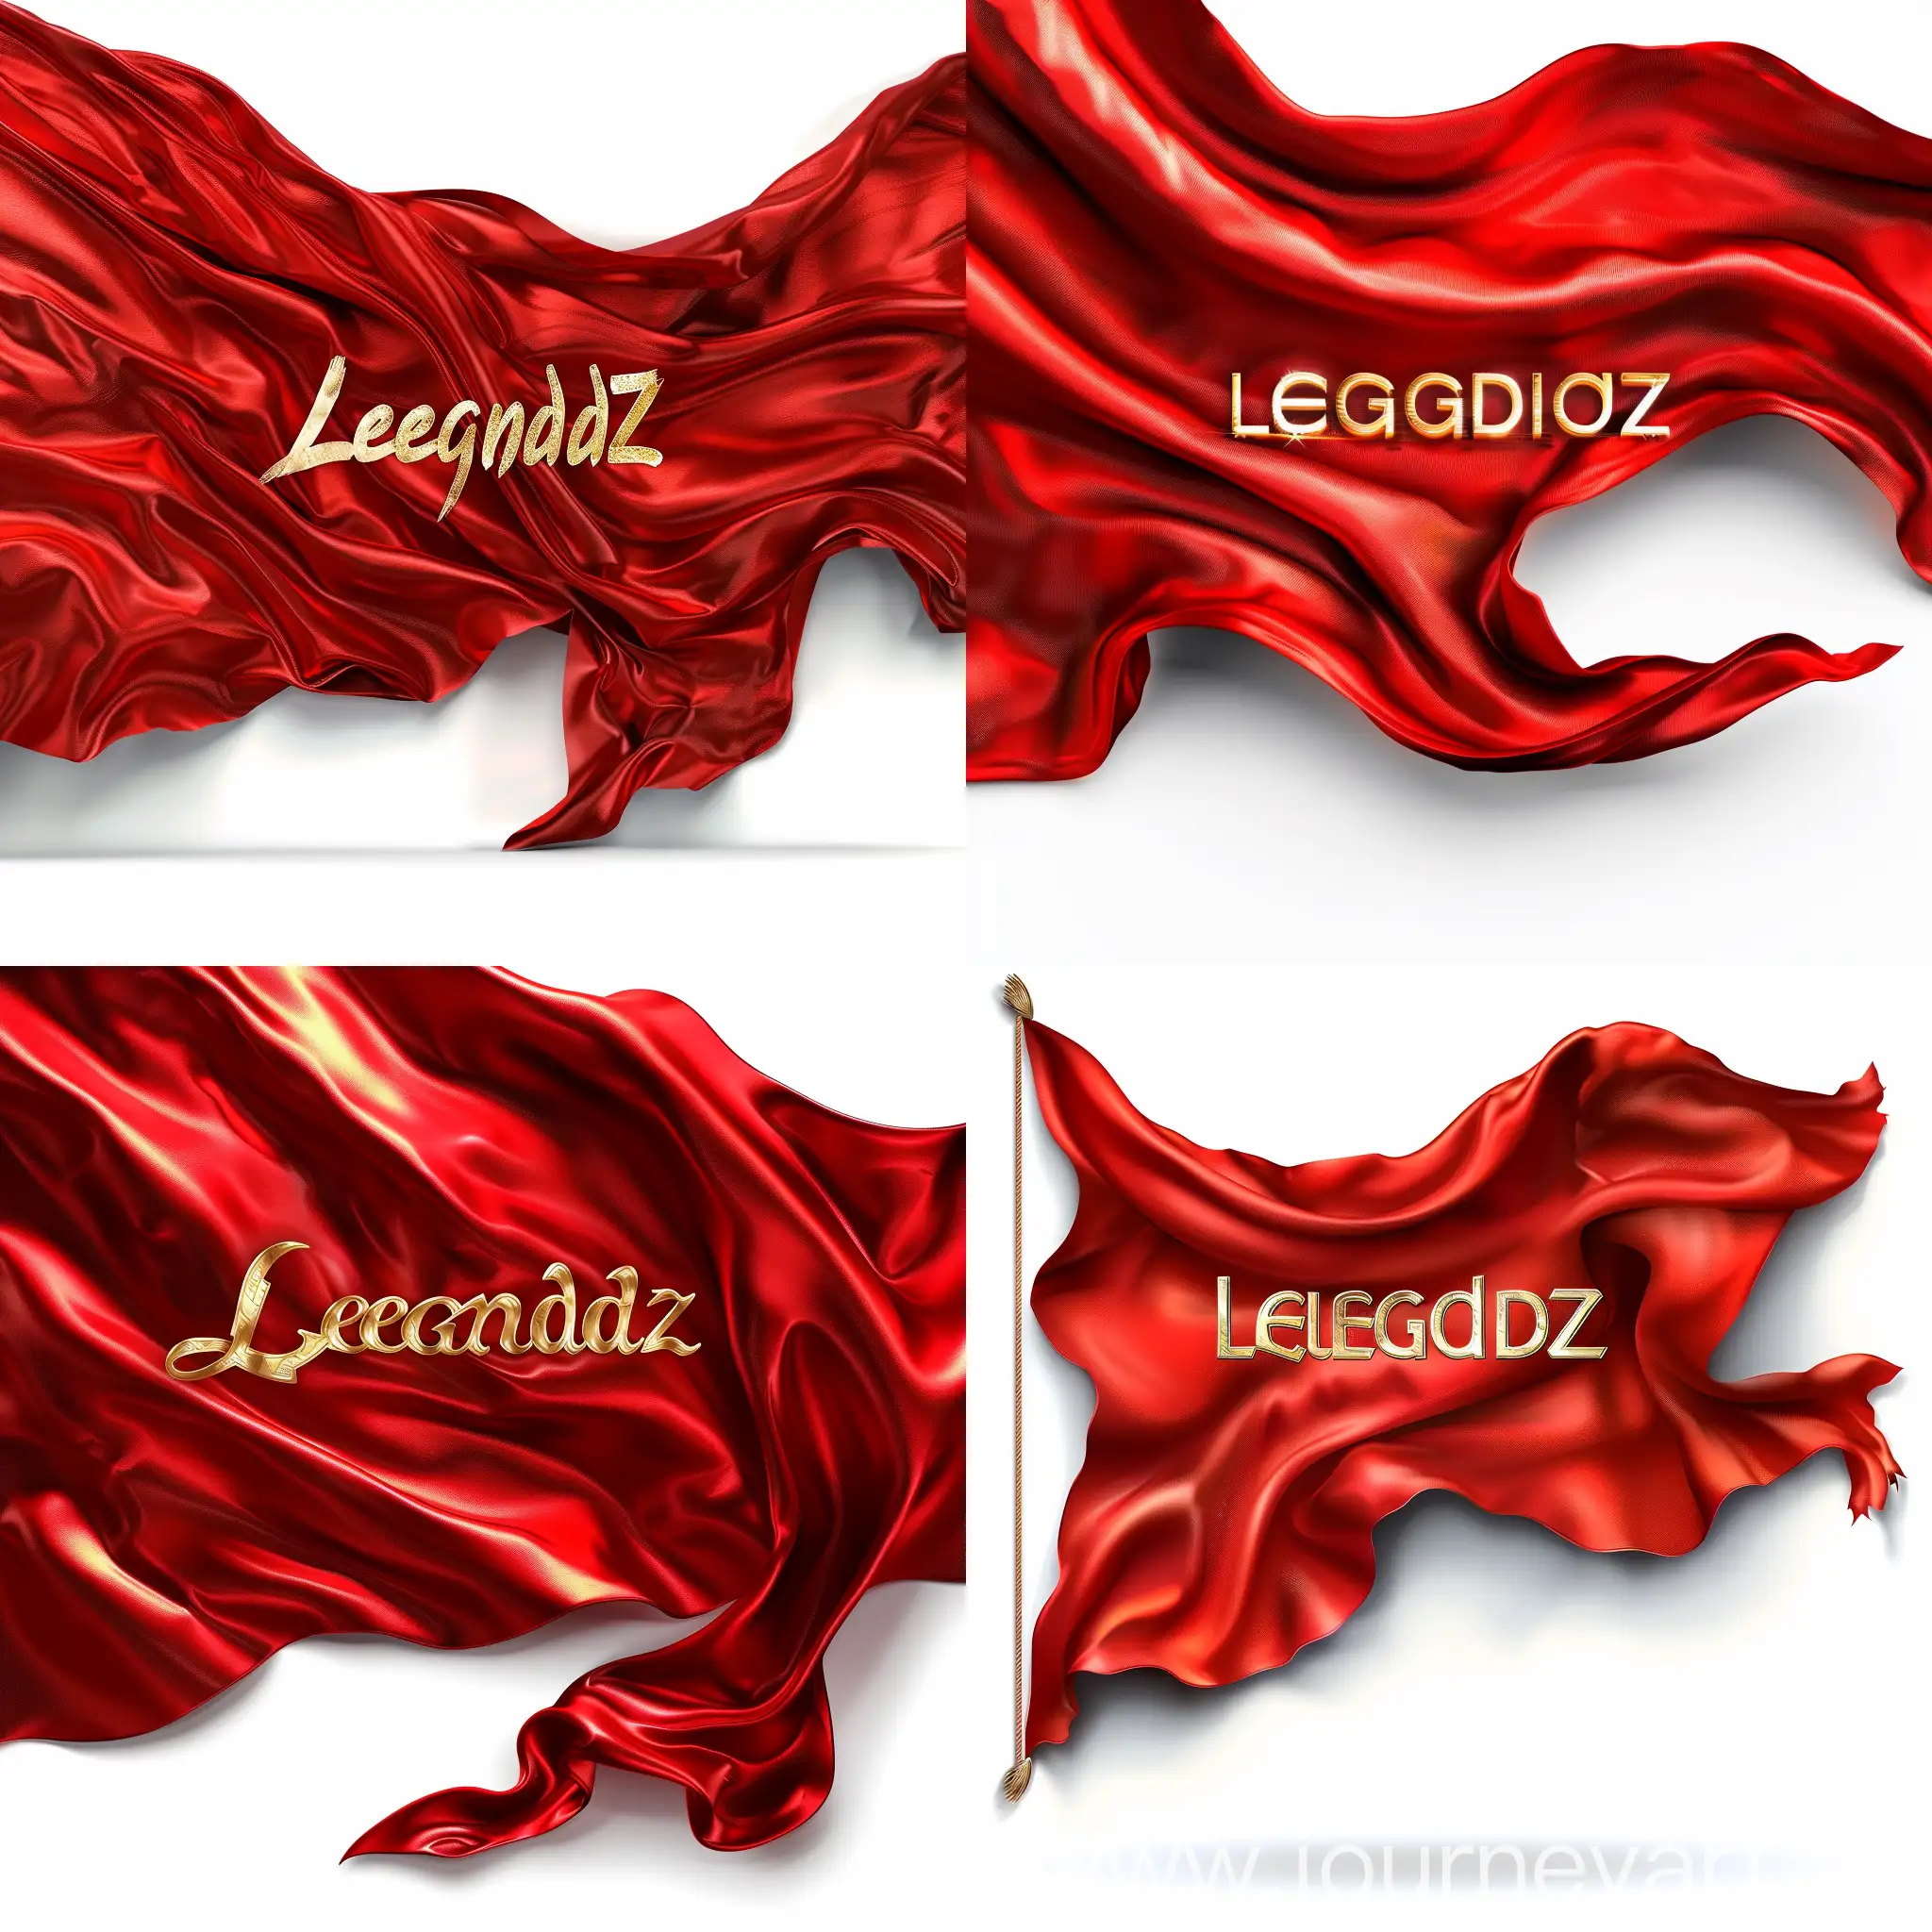 A red silk banner waving in the wind. On a white background. The word 'Legendz' is emblazoned across the center in gleaming gold letters.